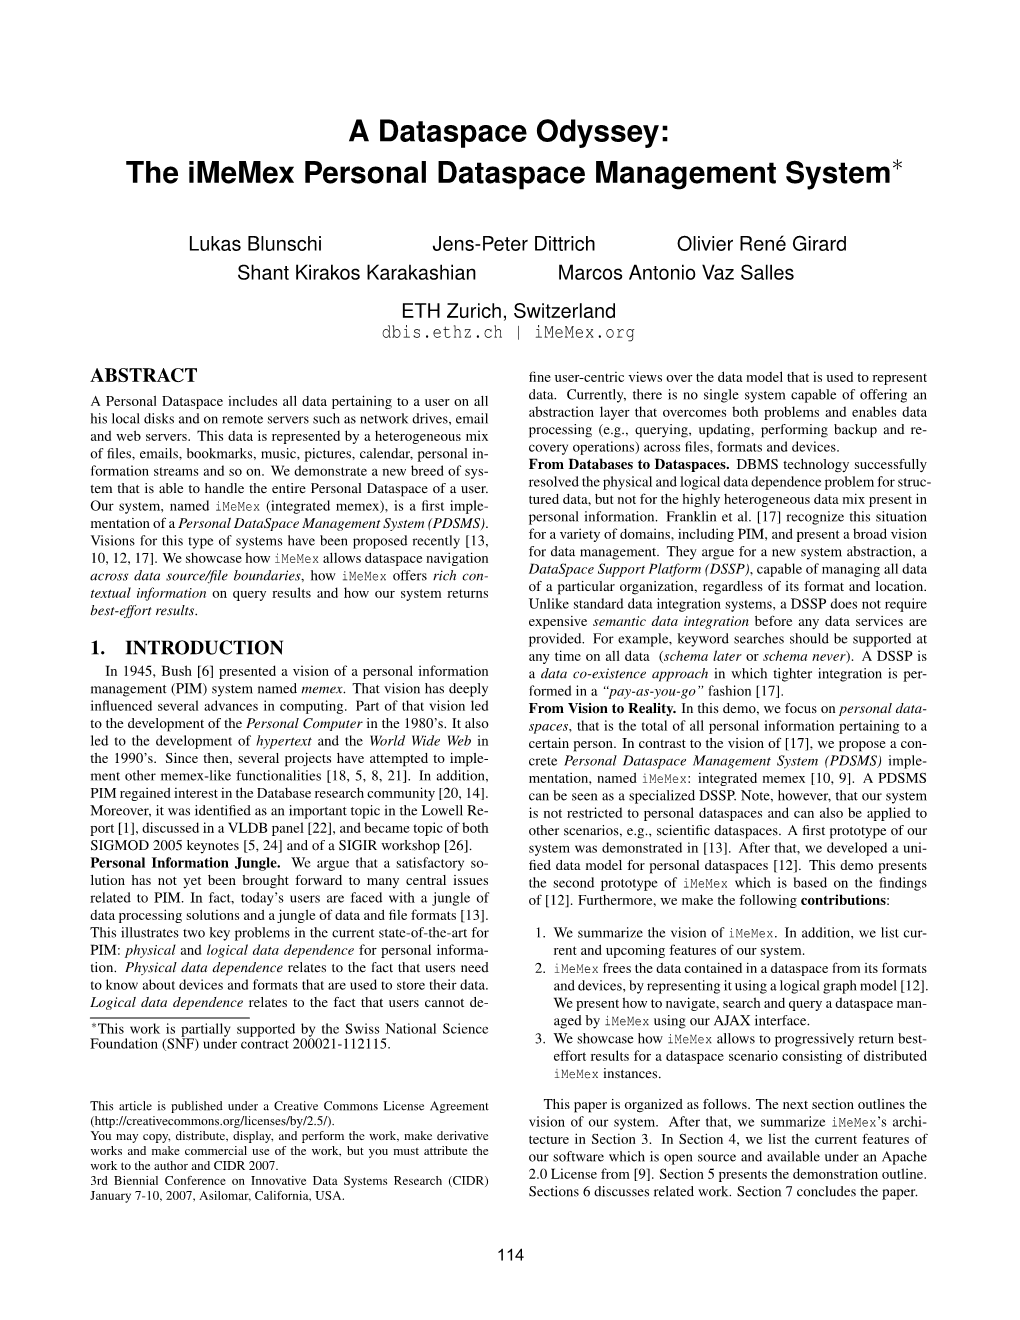 The Imemex Personal Dataspace Management System∗